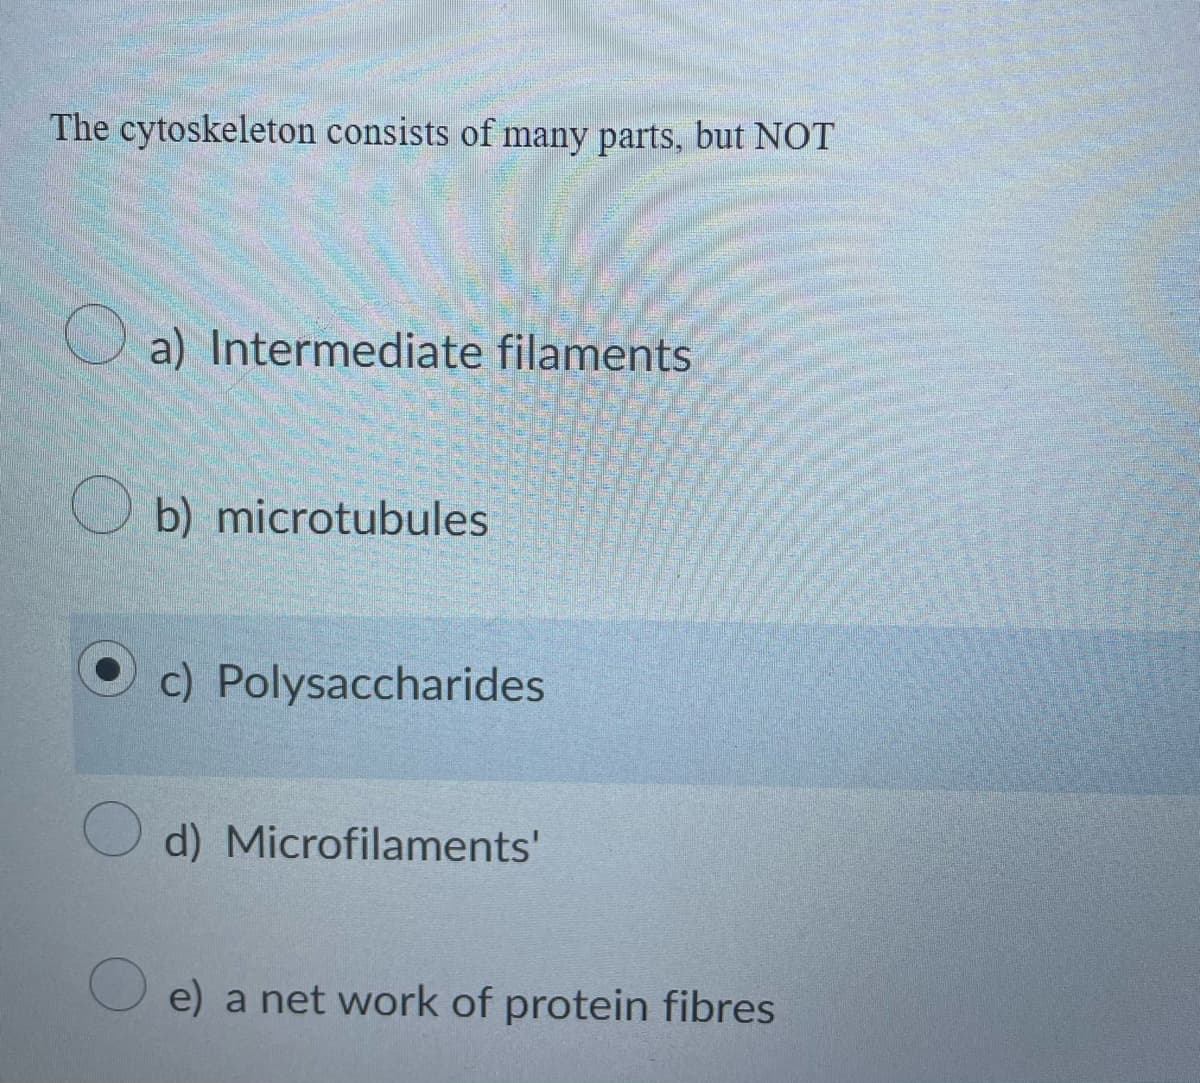 The cytoskeleton consists of many parts, but NOT
O a) Intermediate filaments
O b) microtubules
c) Polysaccharides
d) Microfilaments'
e) a net work of protein fibres
